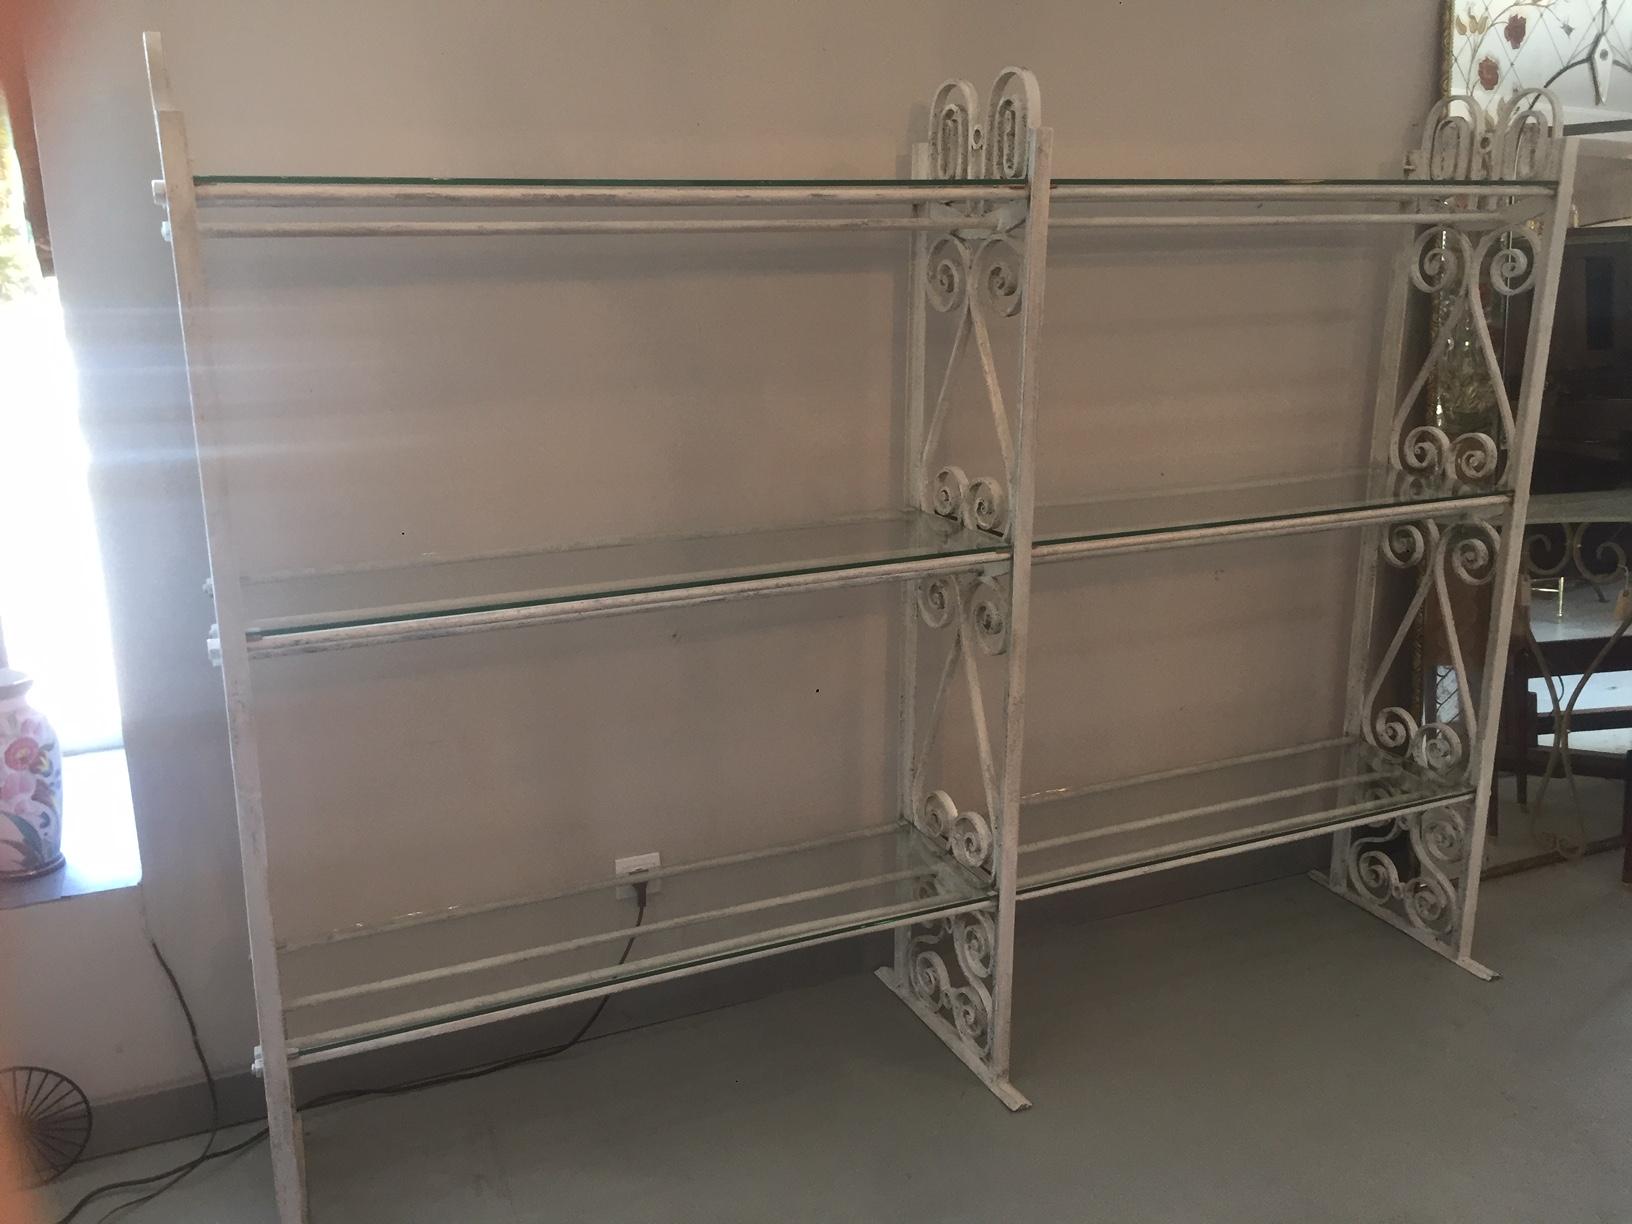 Beautiful 20th century French wrought iron florist shelf from the 1920s.
Every glasses ont the shelves are custom made and removable. 
The iron is white and has been weathered with time. 
Very nice quality.